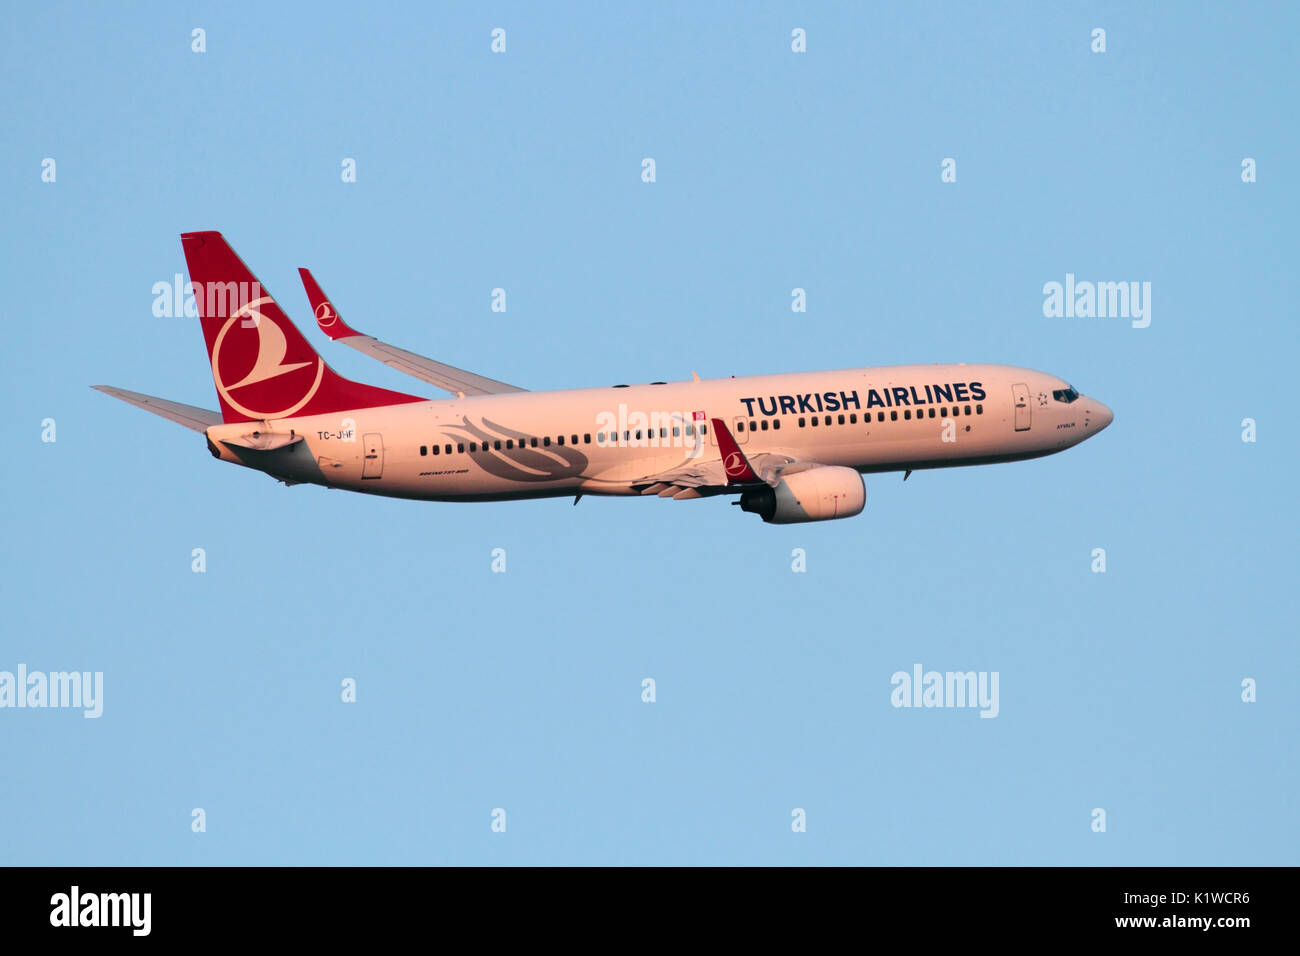 Boeing 737-800 passenger jet plane belonging to Turkish Airlines in flight on departure at sunset. Air travel and commercial flying. Stock Photo